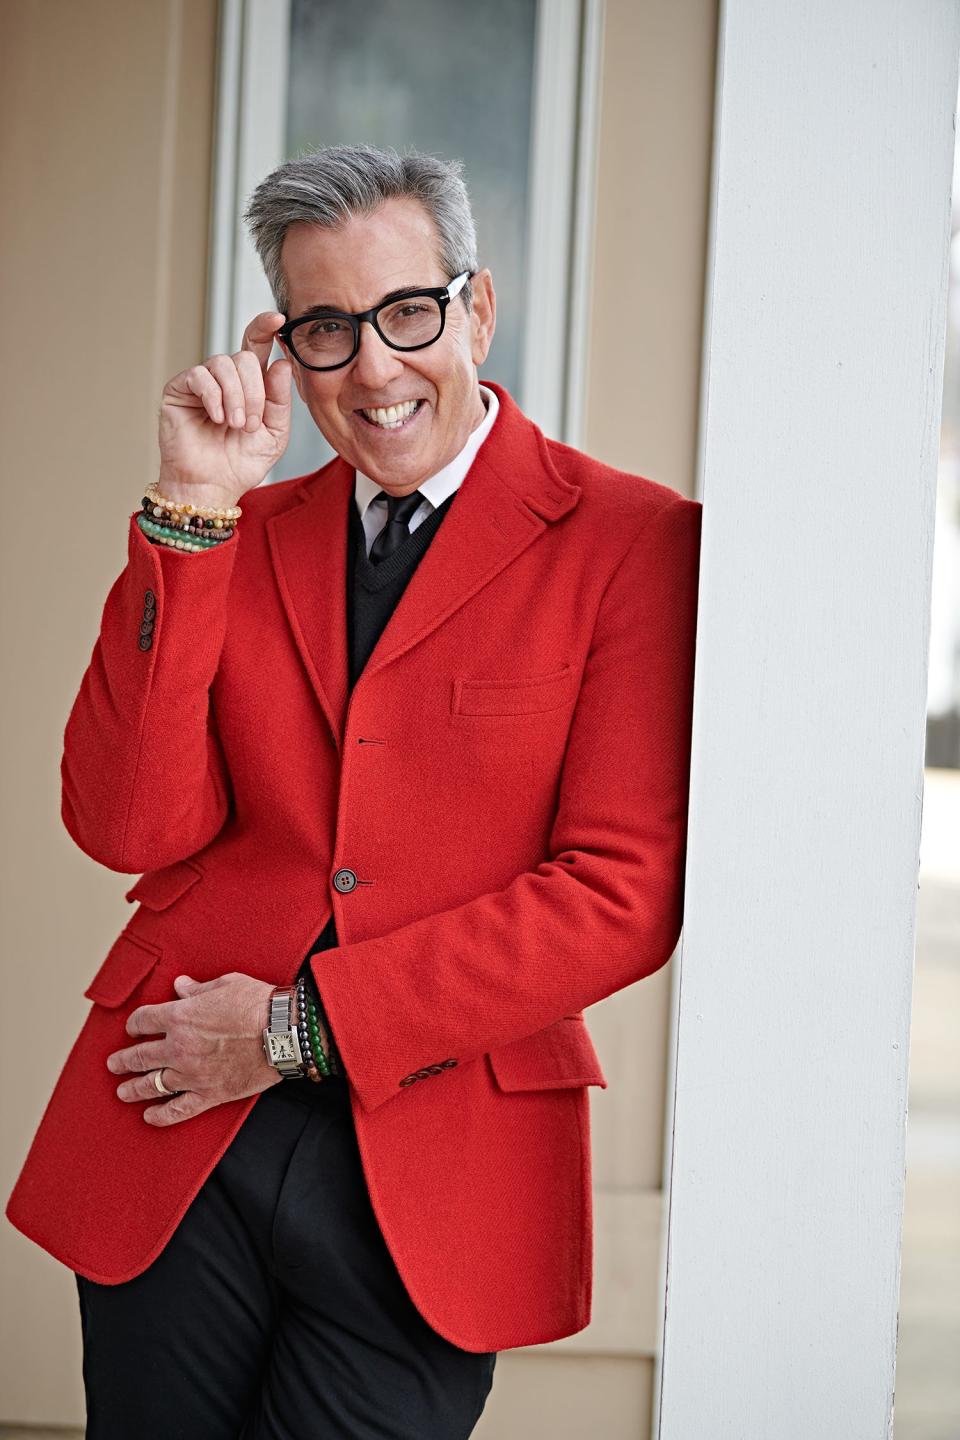 Celebrity stylist George Brescia will offer tips about color and silhouette at an April 24 fundraiser for the JFK Hyannis Museum.